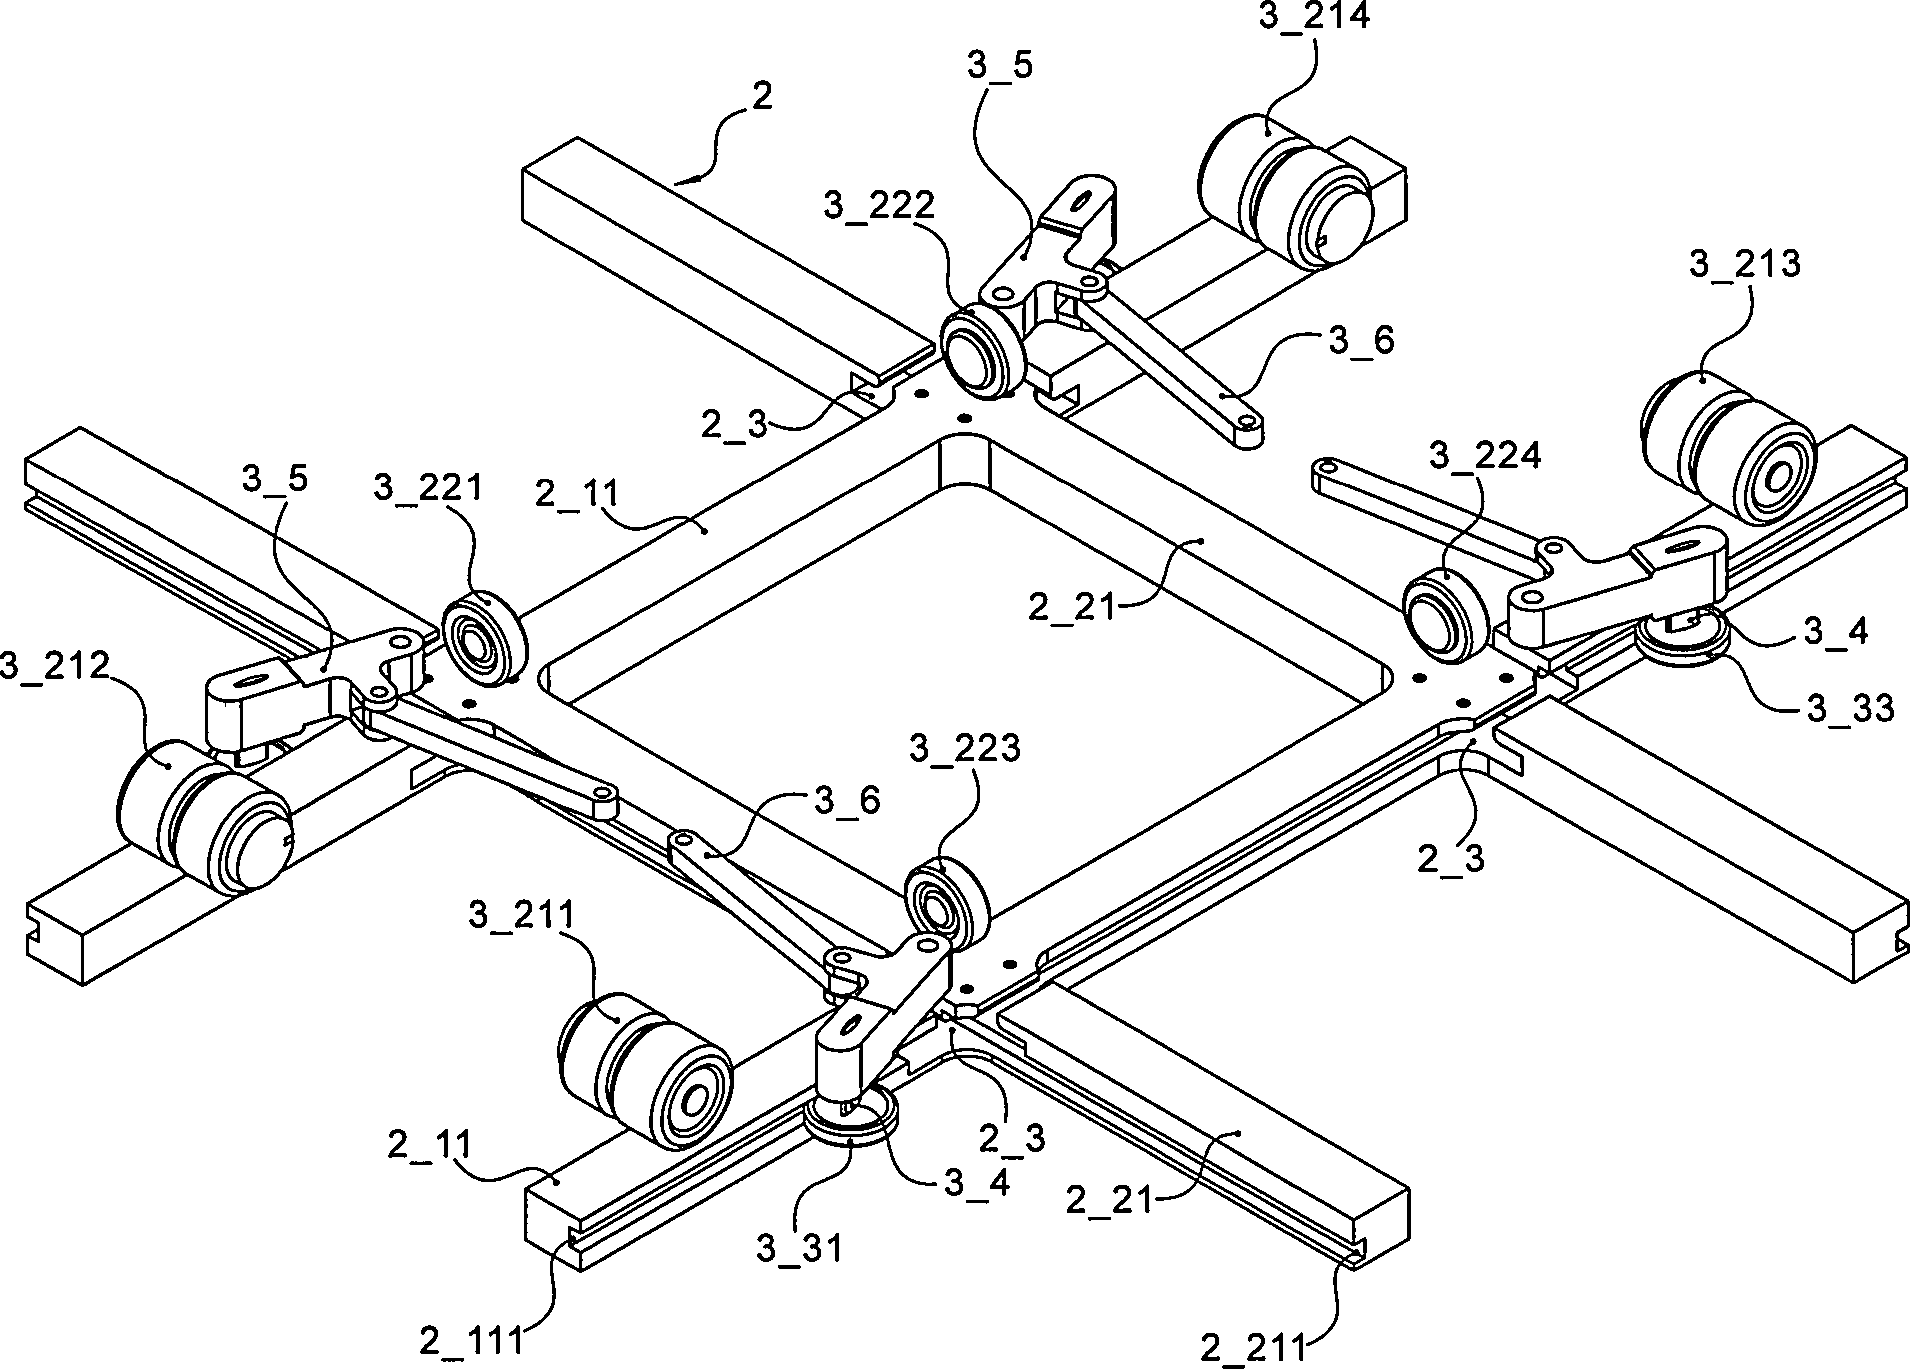 Comb-shaped parking frame for parking garage and applicable carrying trolley